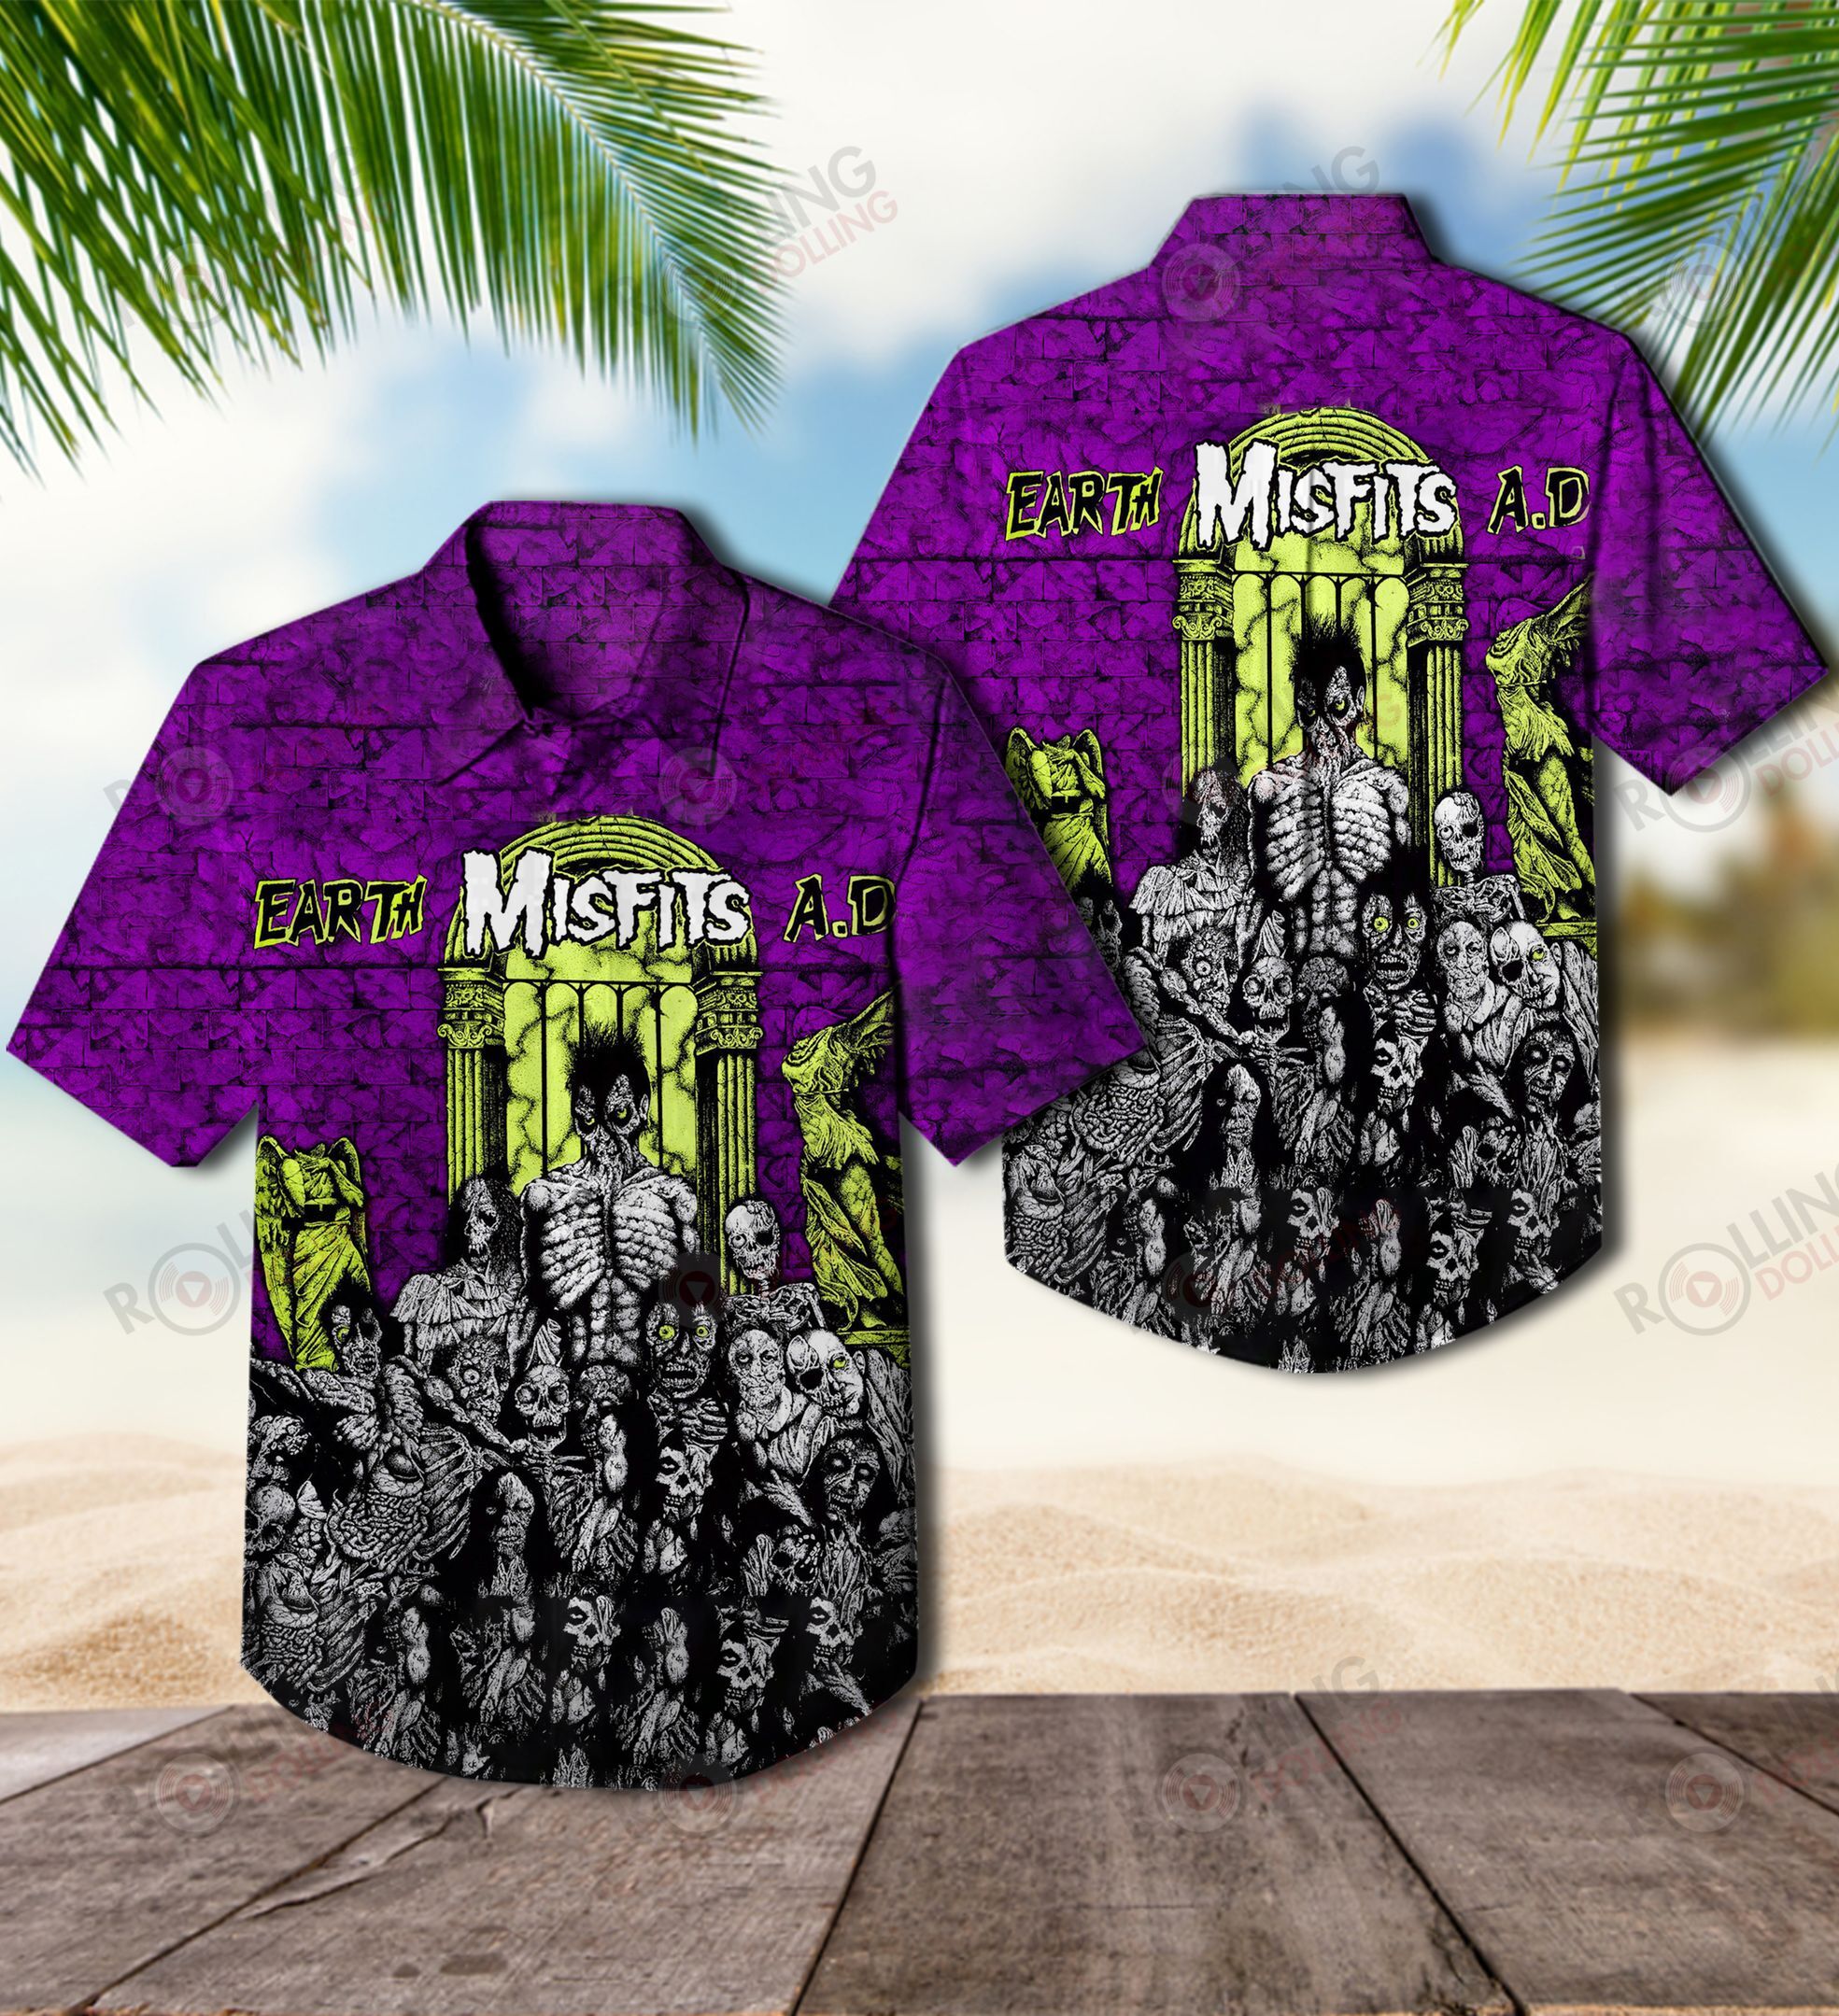 The Hawaiian Shirt is a popular shirt that is worn by Rock band fans 35